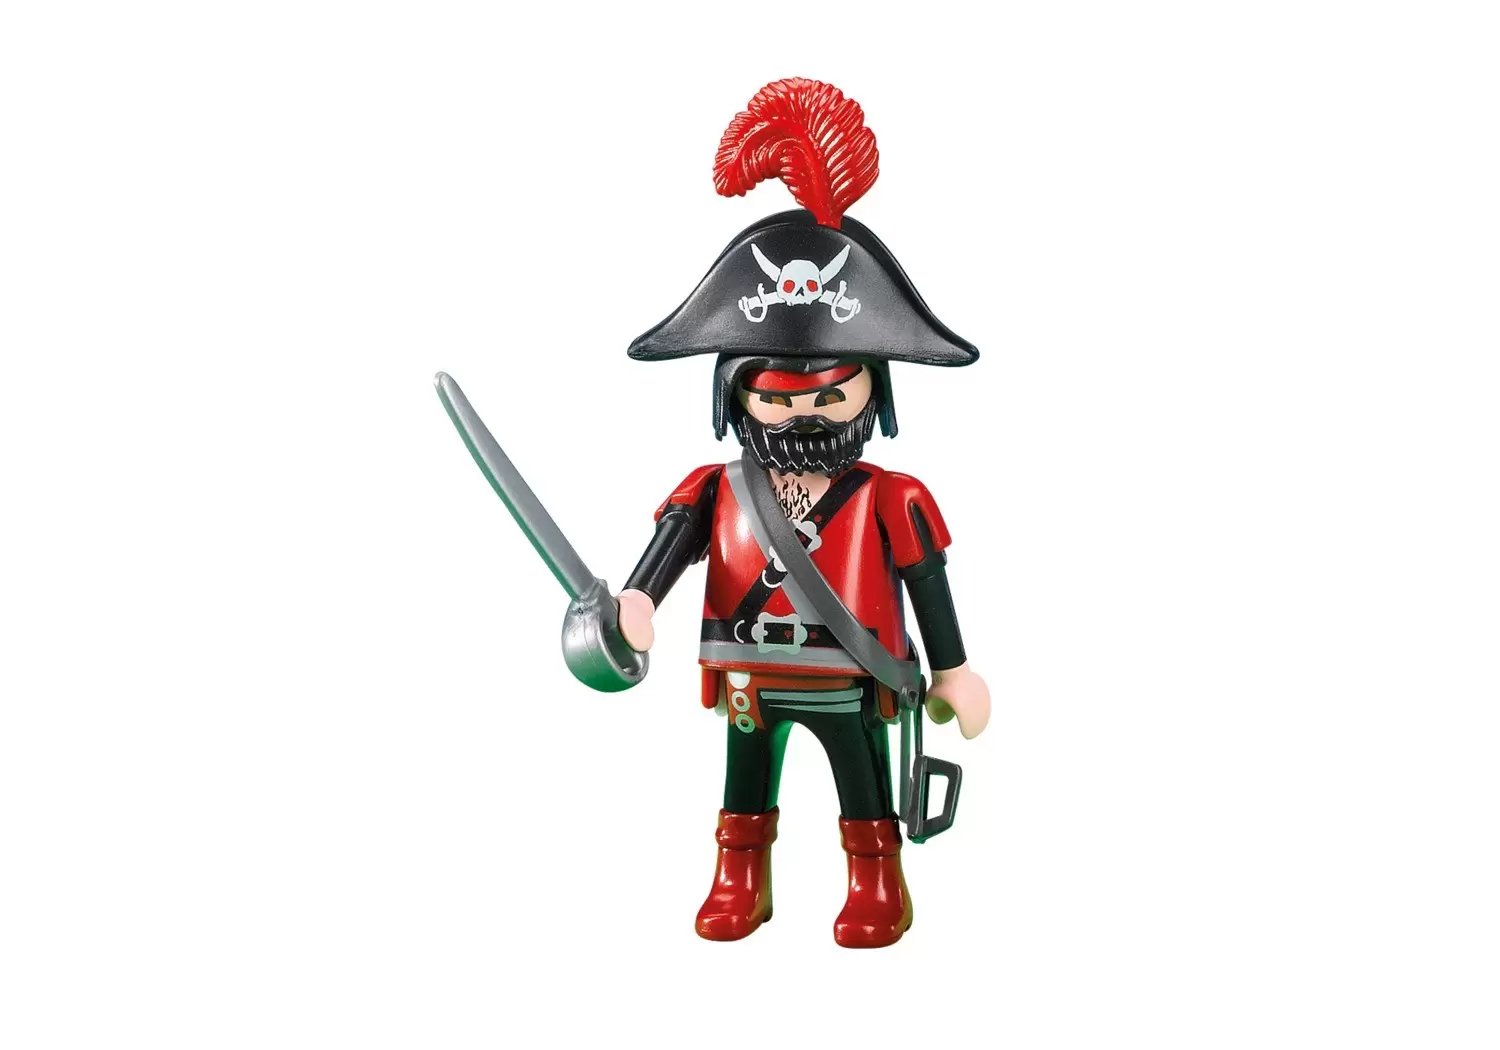 Pirate Playmobil - Captain of the pirates